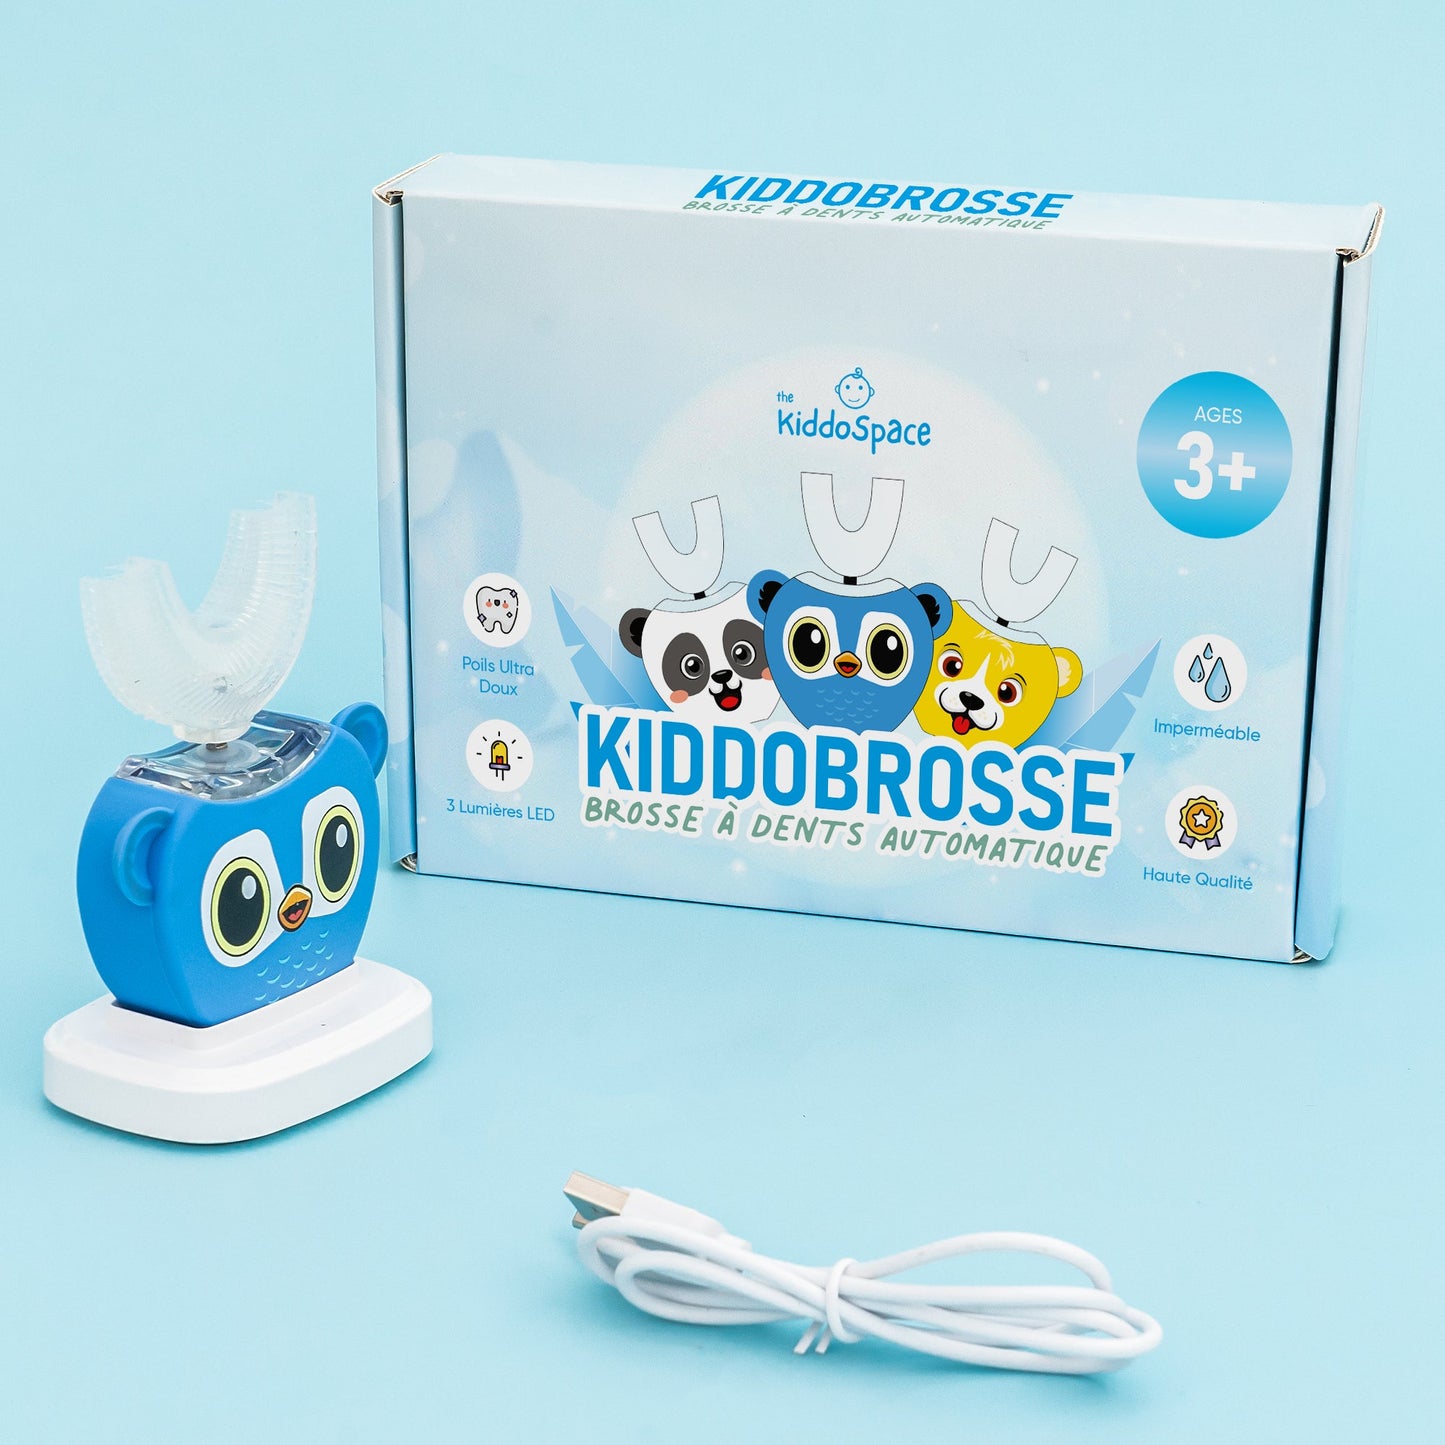 HappyTeeth KiddoBrosse: Smile Without The Fight